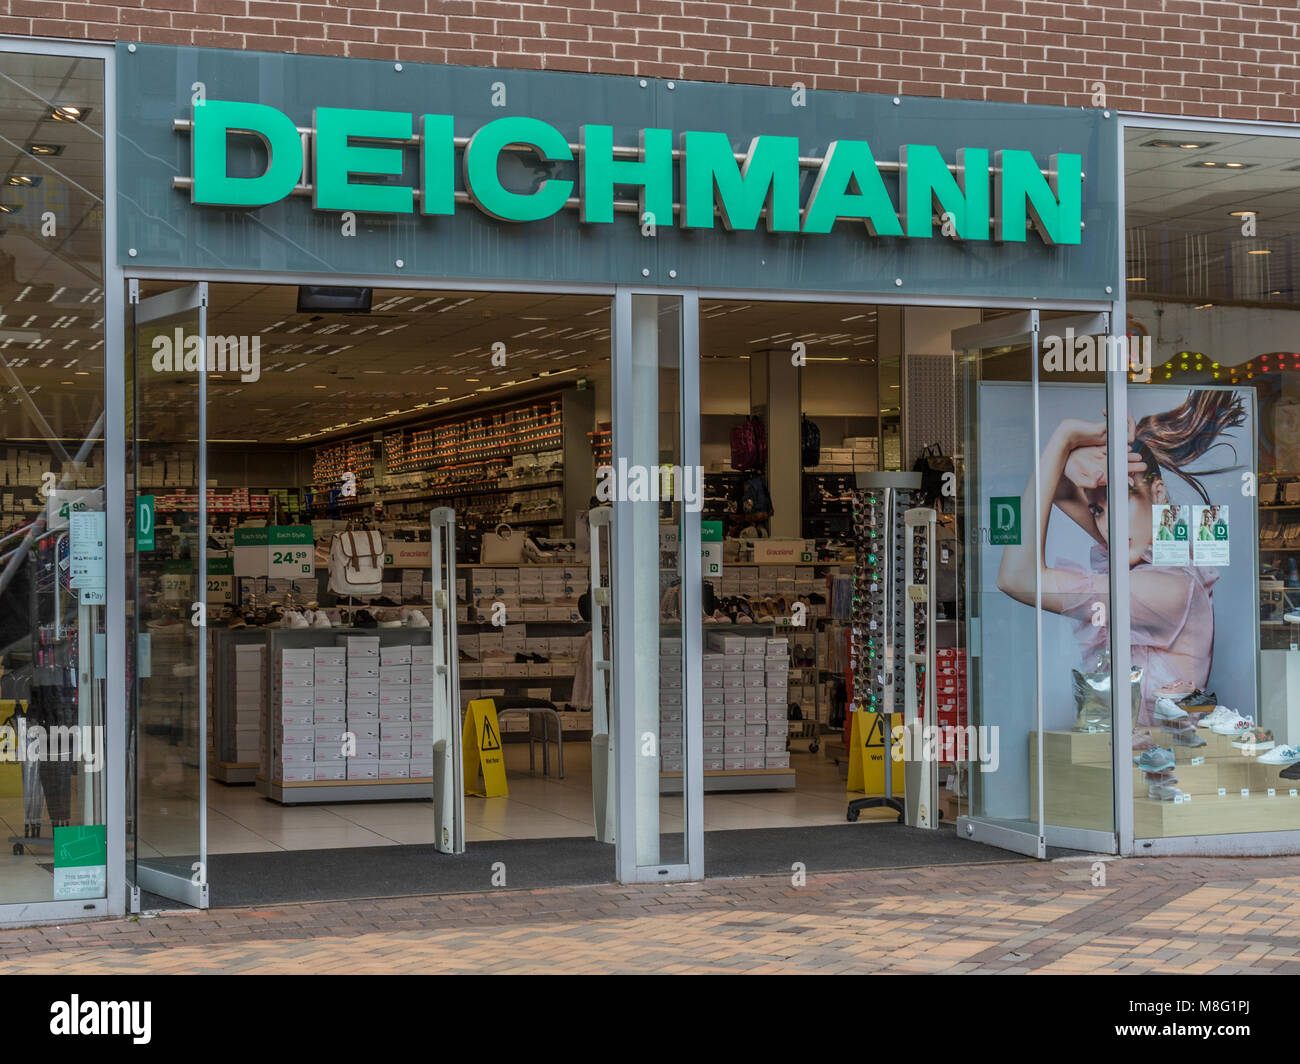 Deichmann shoe store photography images - Alamy